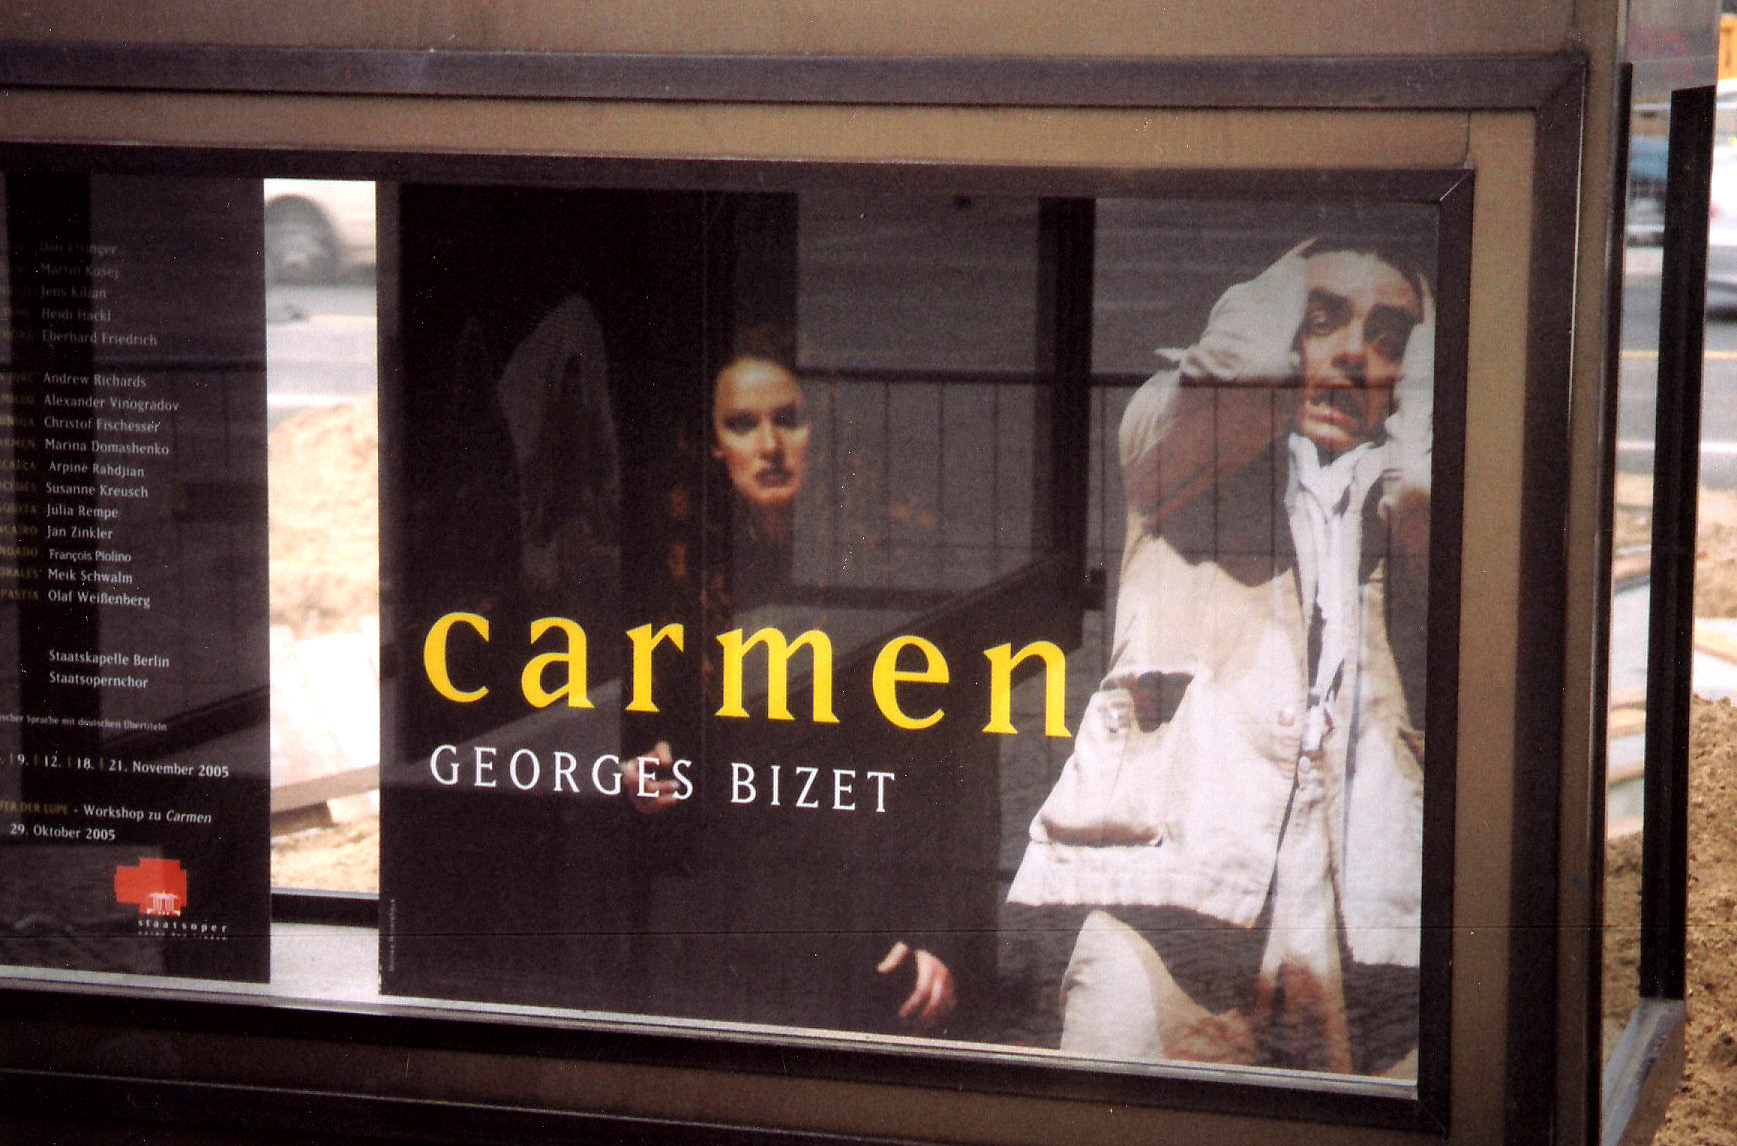 Heres an ad for Carmen that I saw on Unter den Linden.